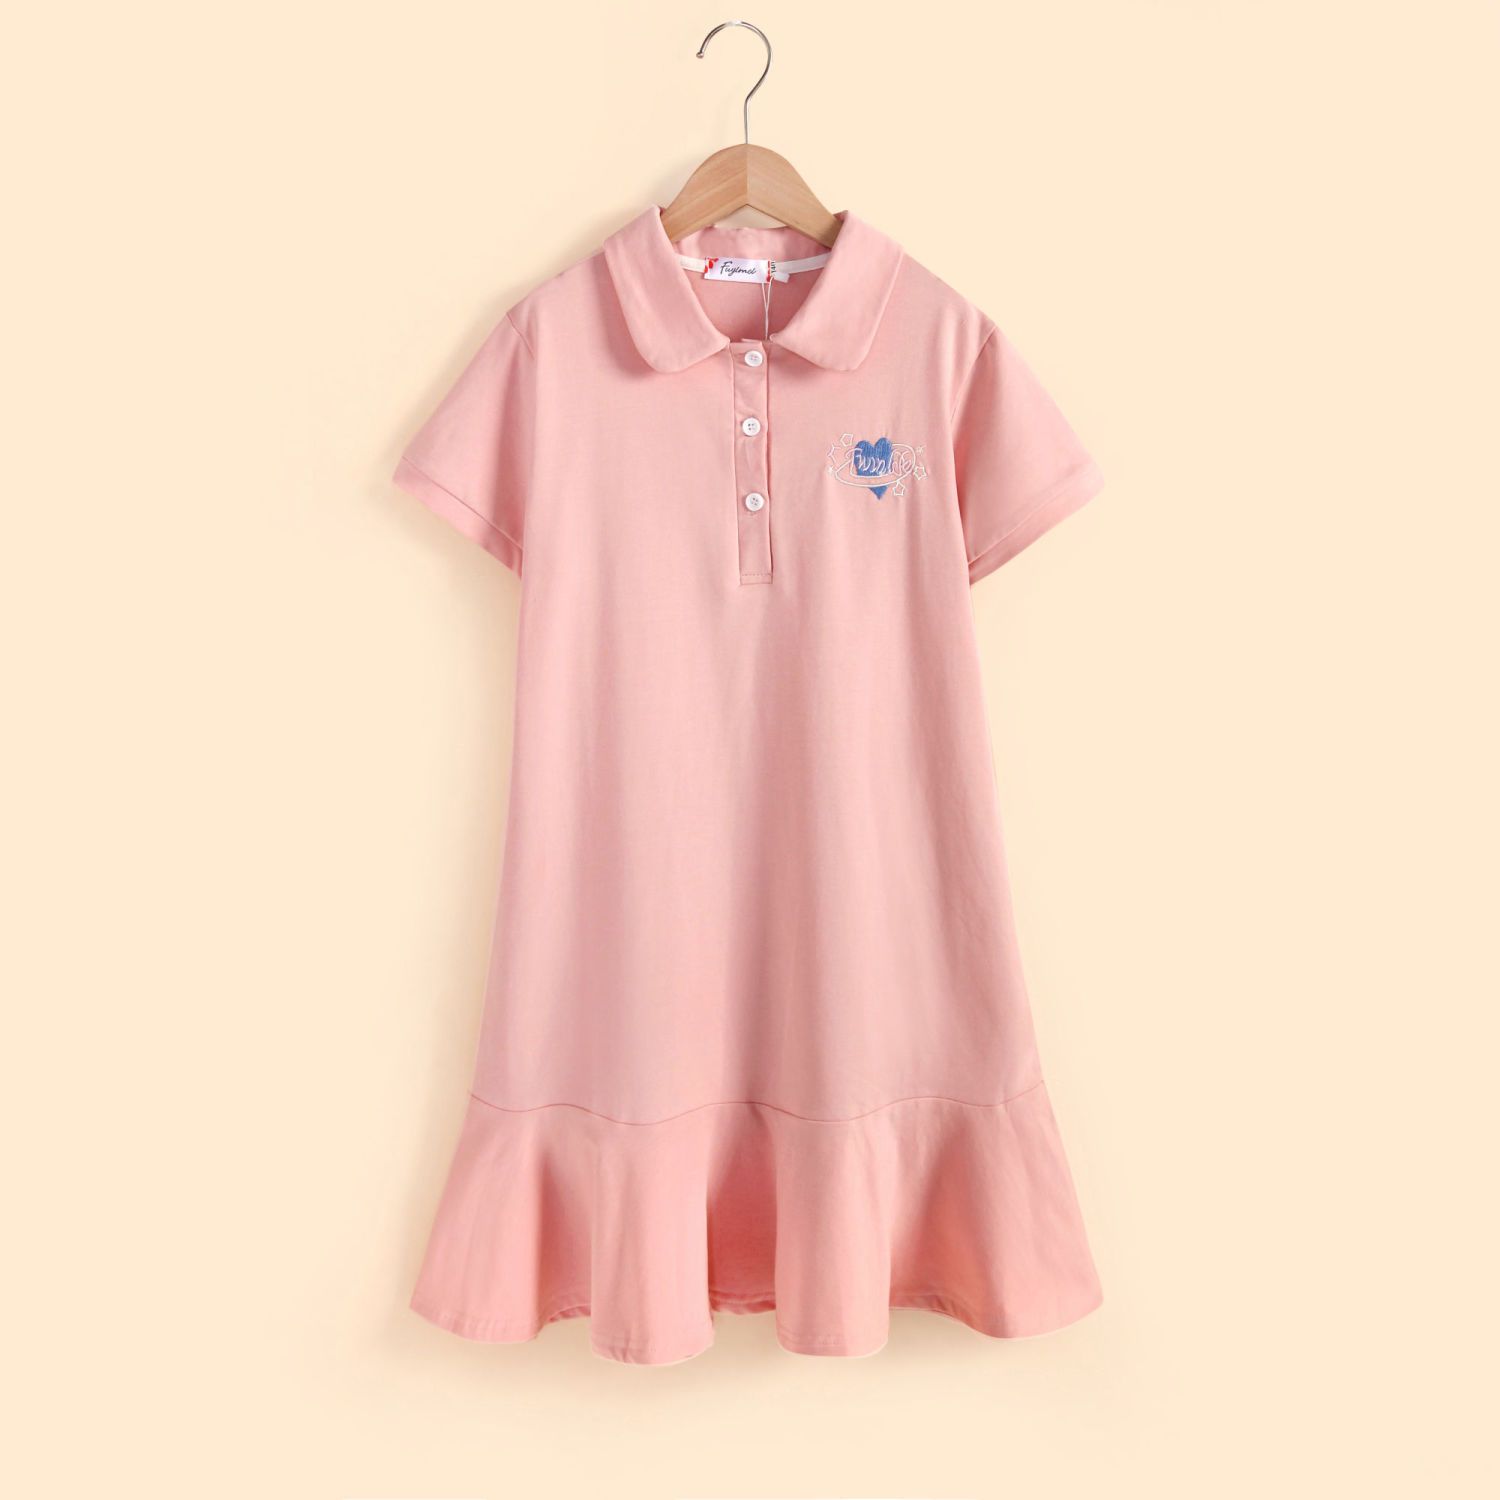 Girls polo skirt summer new children's polo dress drape foreign style middle and big children's student clothing